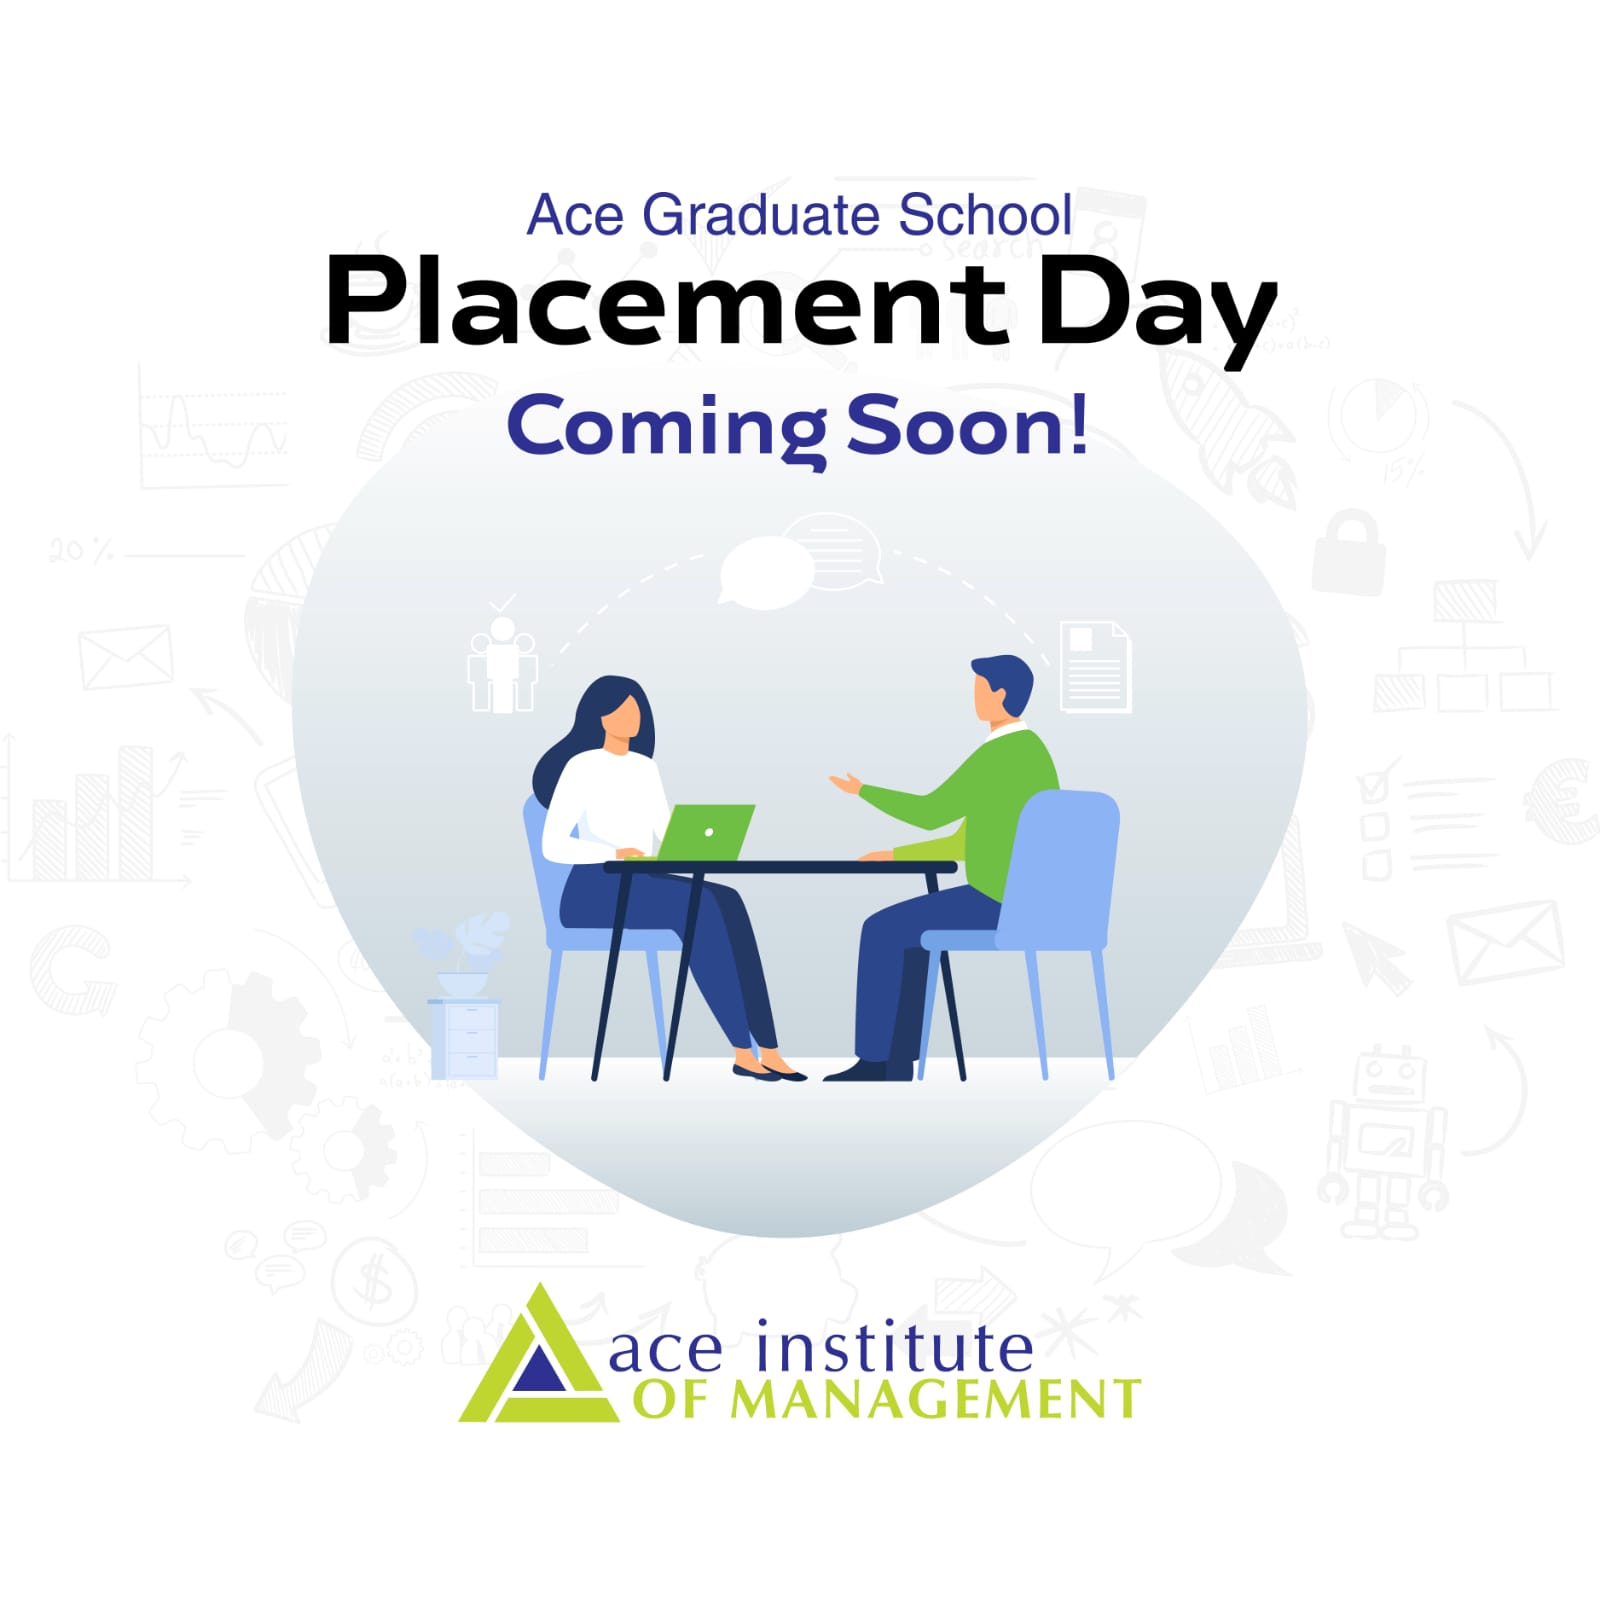 Ace Graduate School Placement Day Coming soon